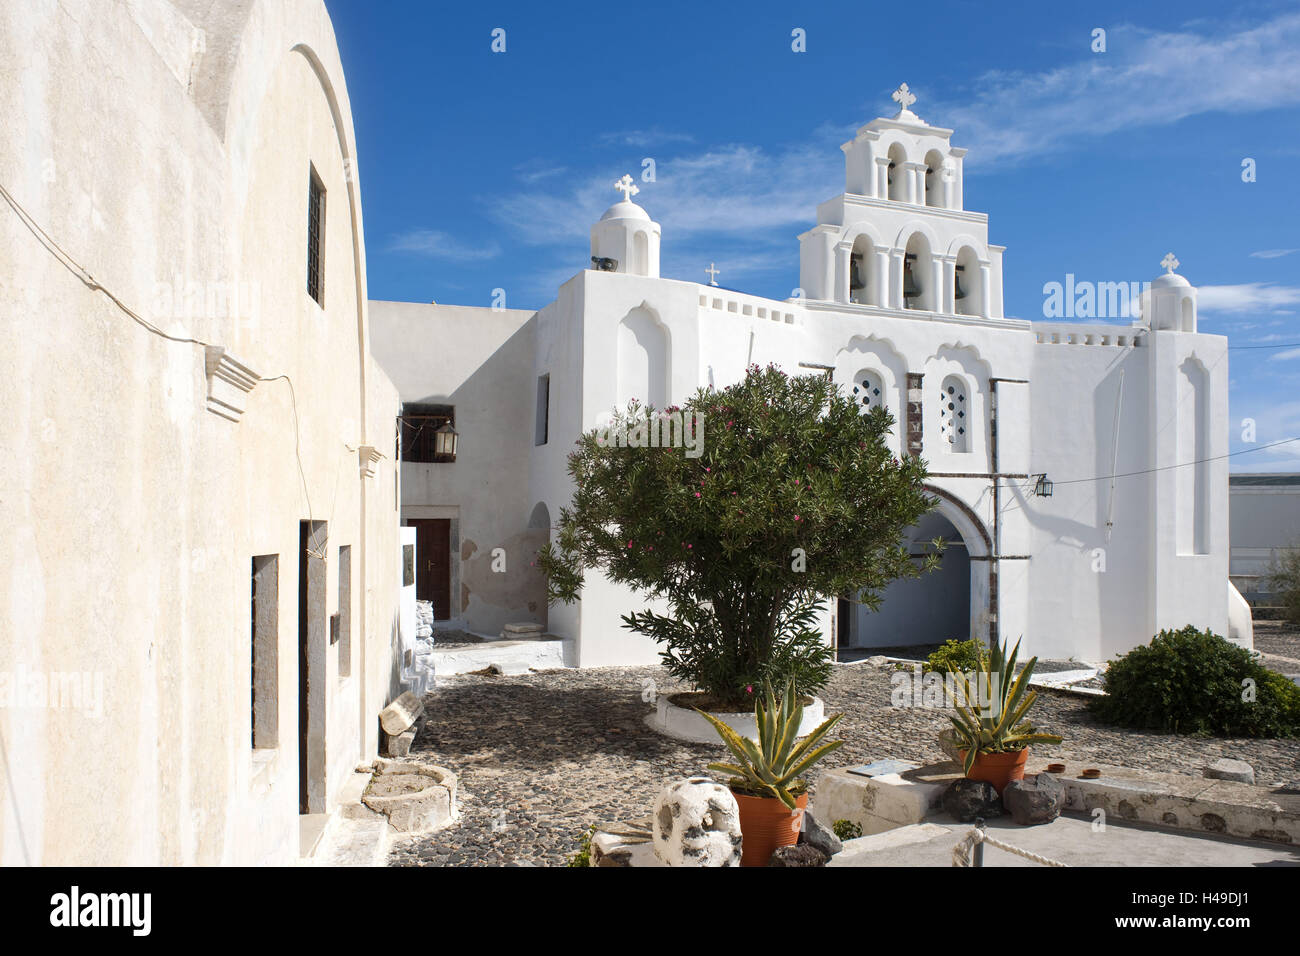 Greece, the Cyclades, Santorini, Pyrgos, church the archangel Michael and holy Theodora in the Old Town Kastelli, on the left the band Agia Triada, museum for icons and liturgical objects, Stock Photo